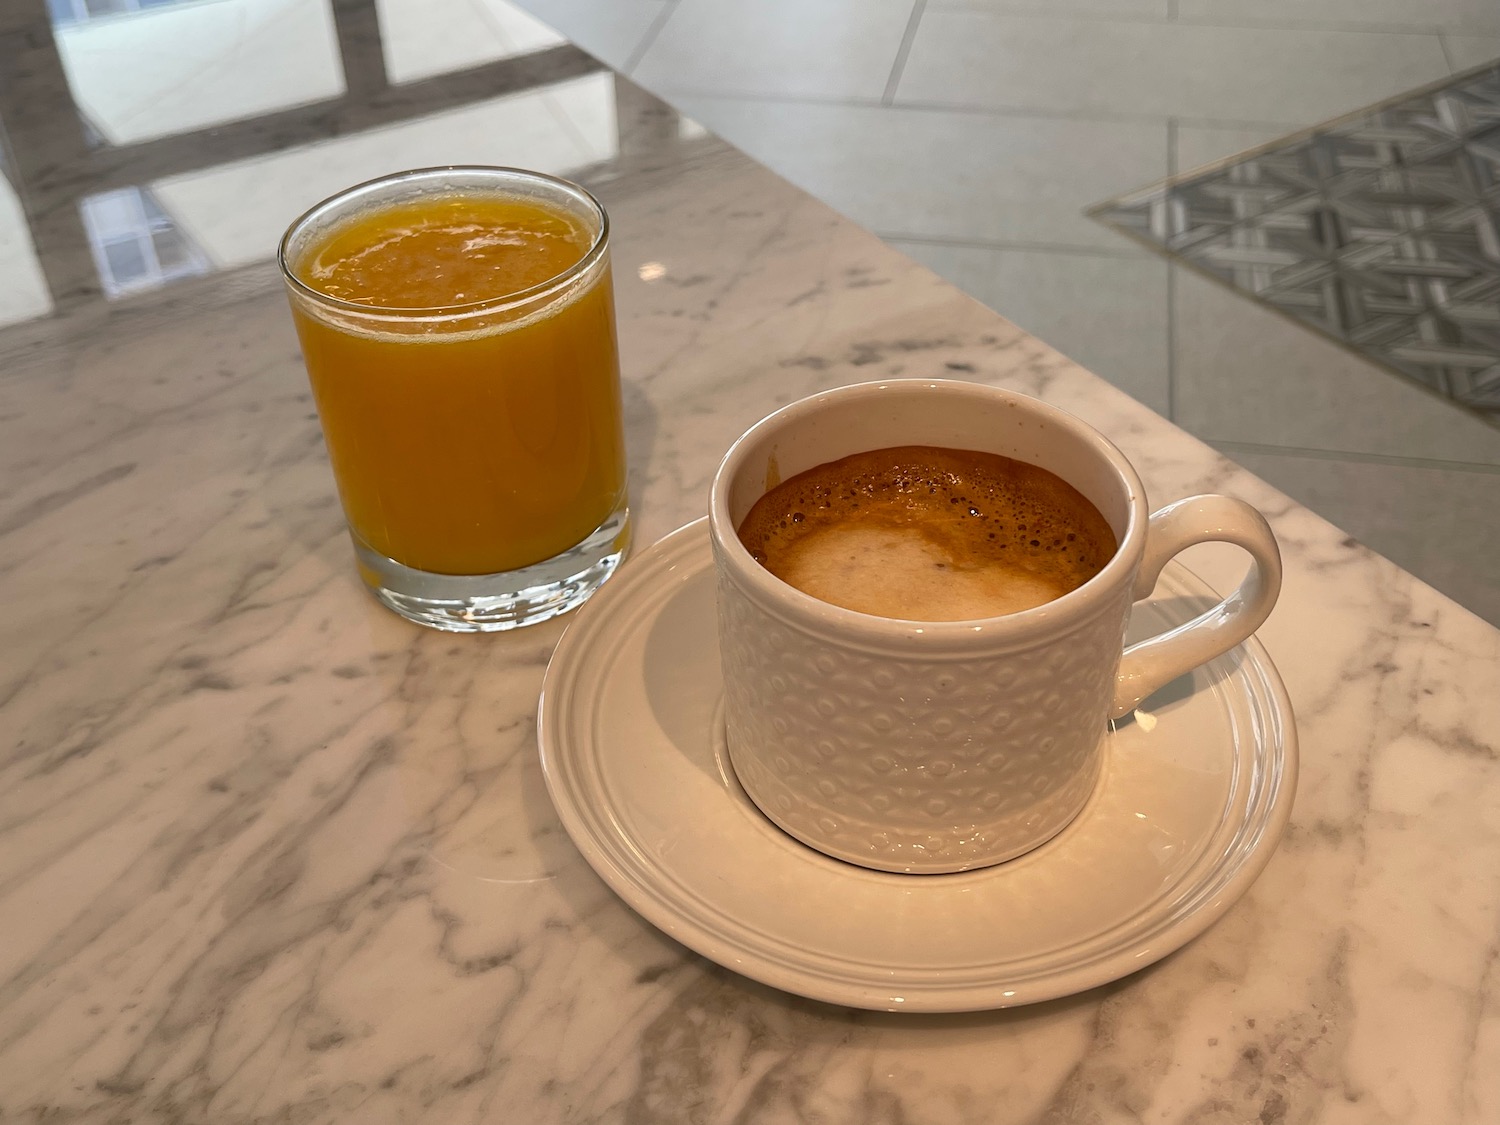 a cup of coffee and a glass of orange juice on a marble table